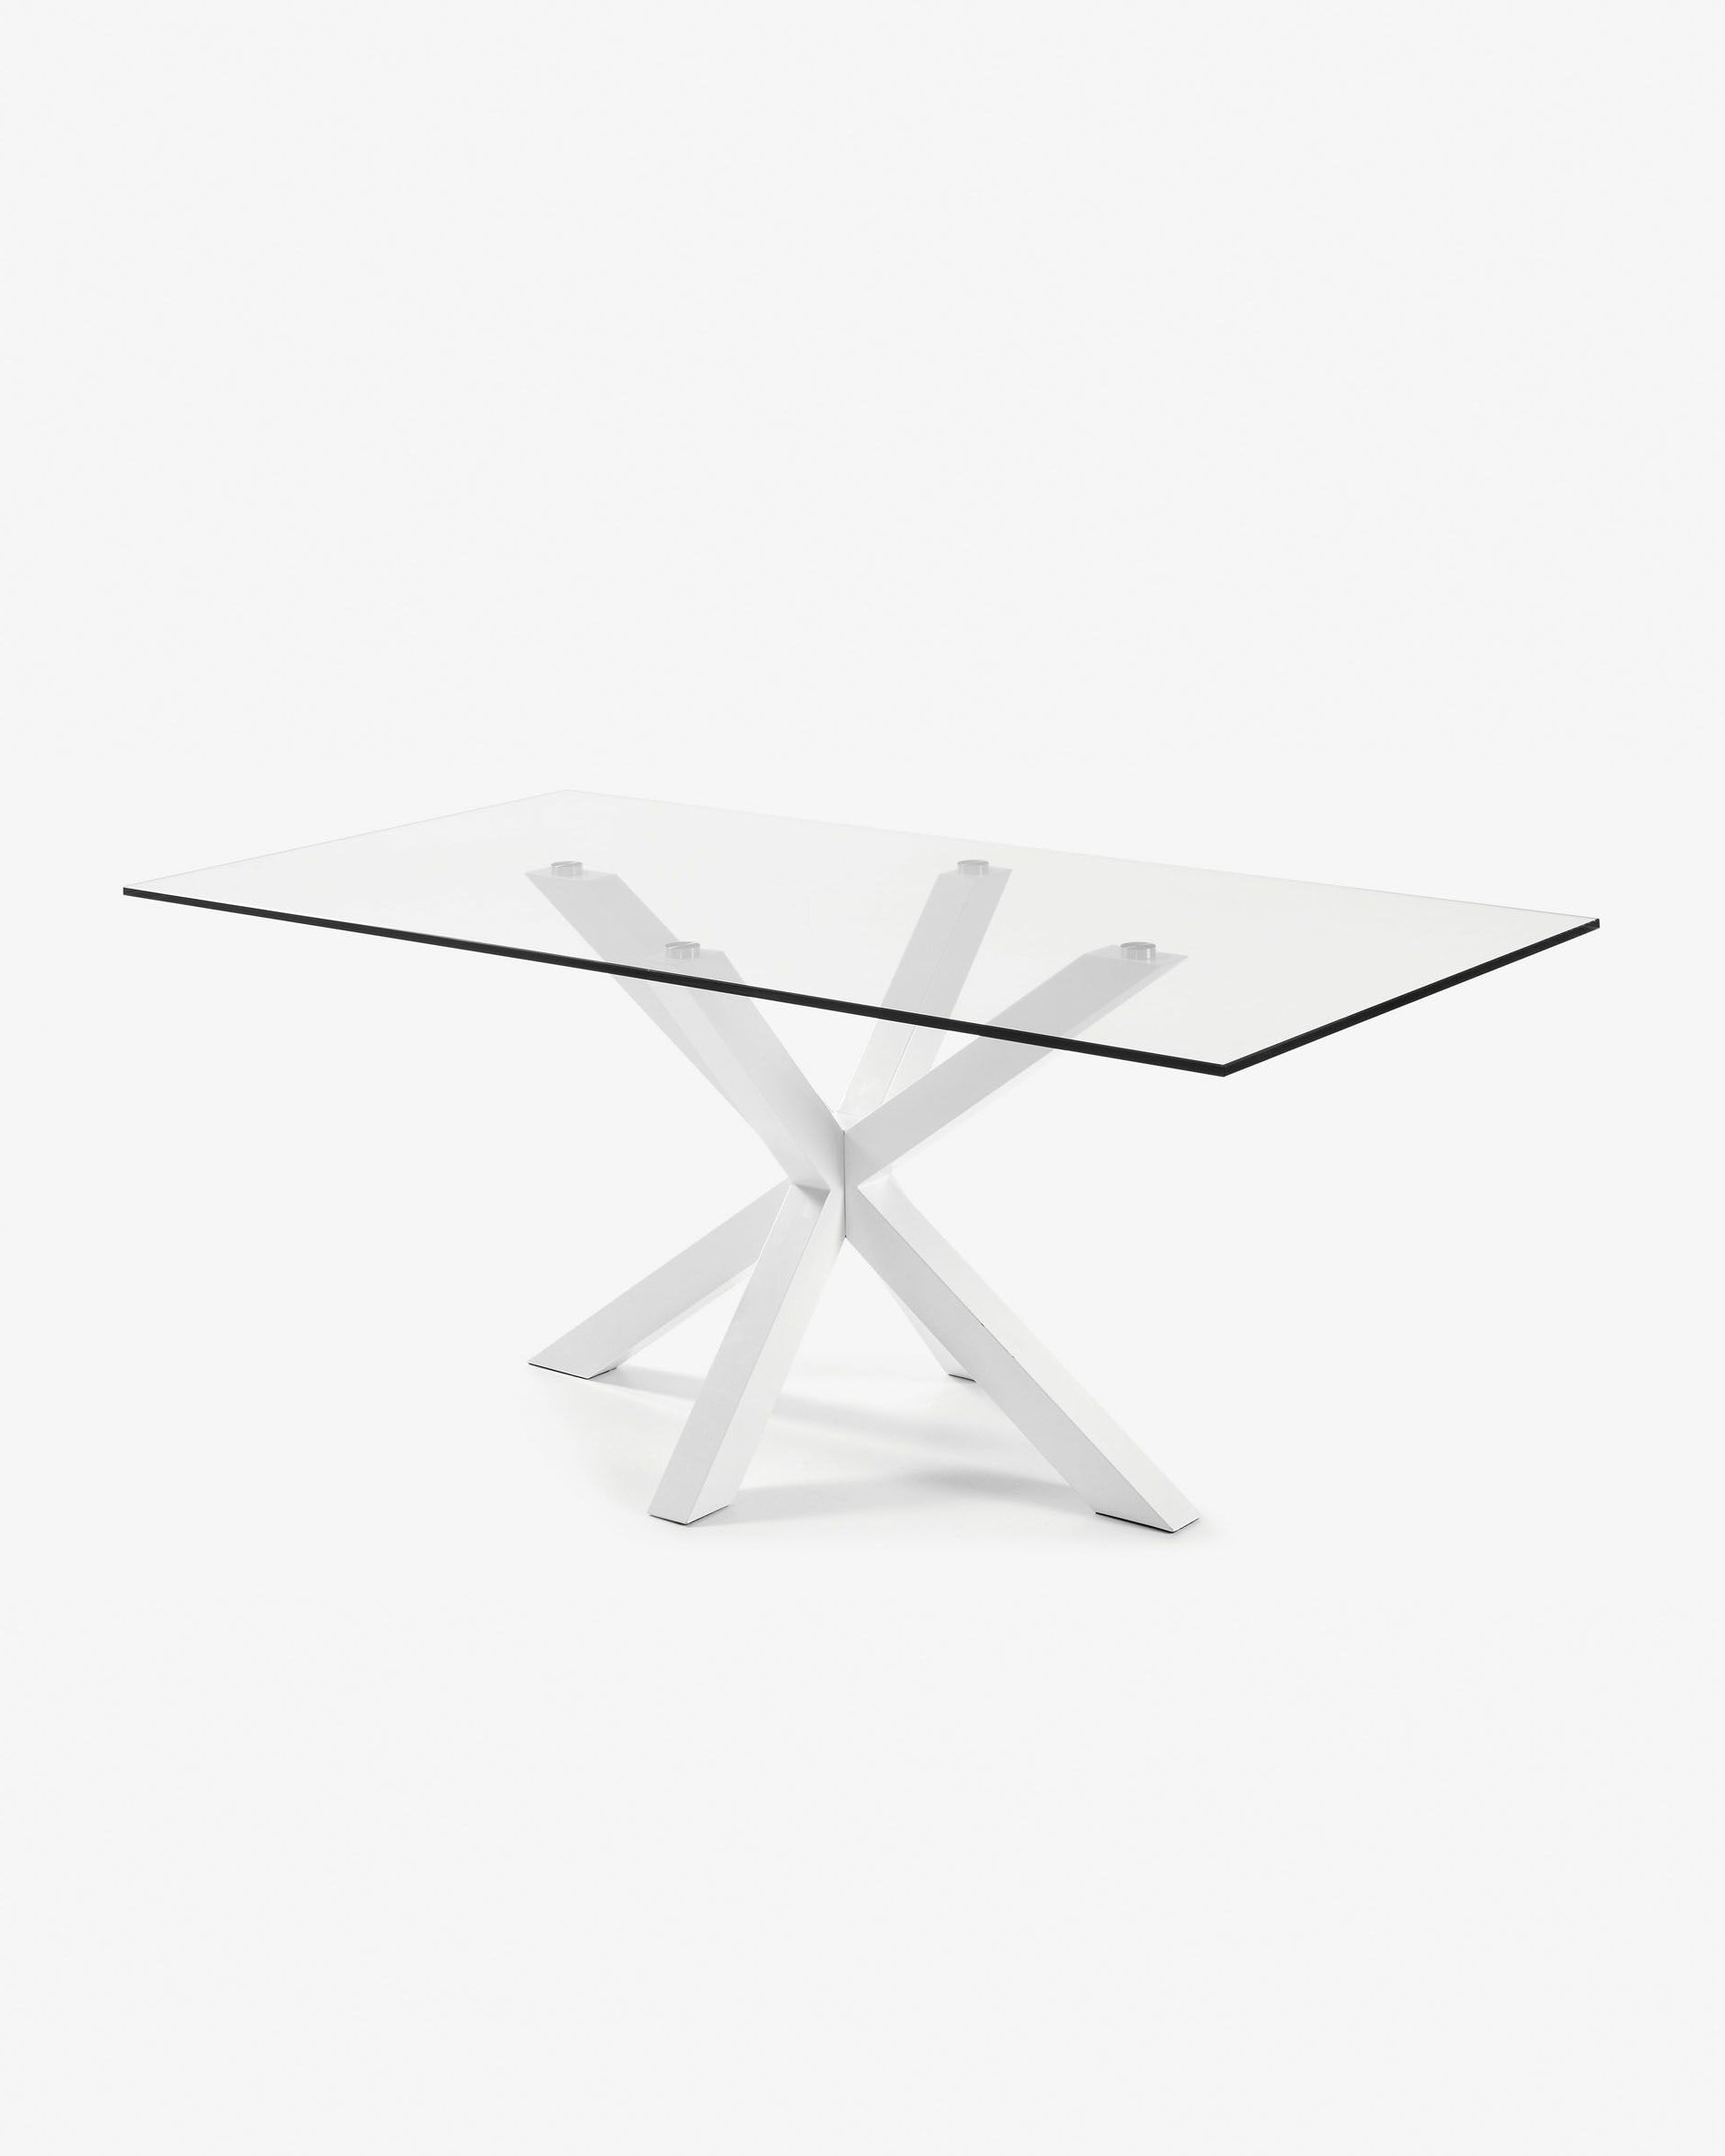 Dining Tables With Black U Legs With Regard To Most Current Argo Table 200 Cm Glass White Legs (View 22 of 25)